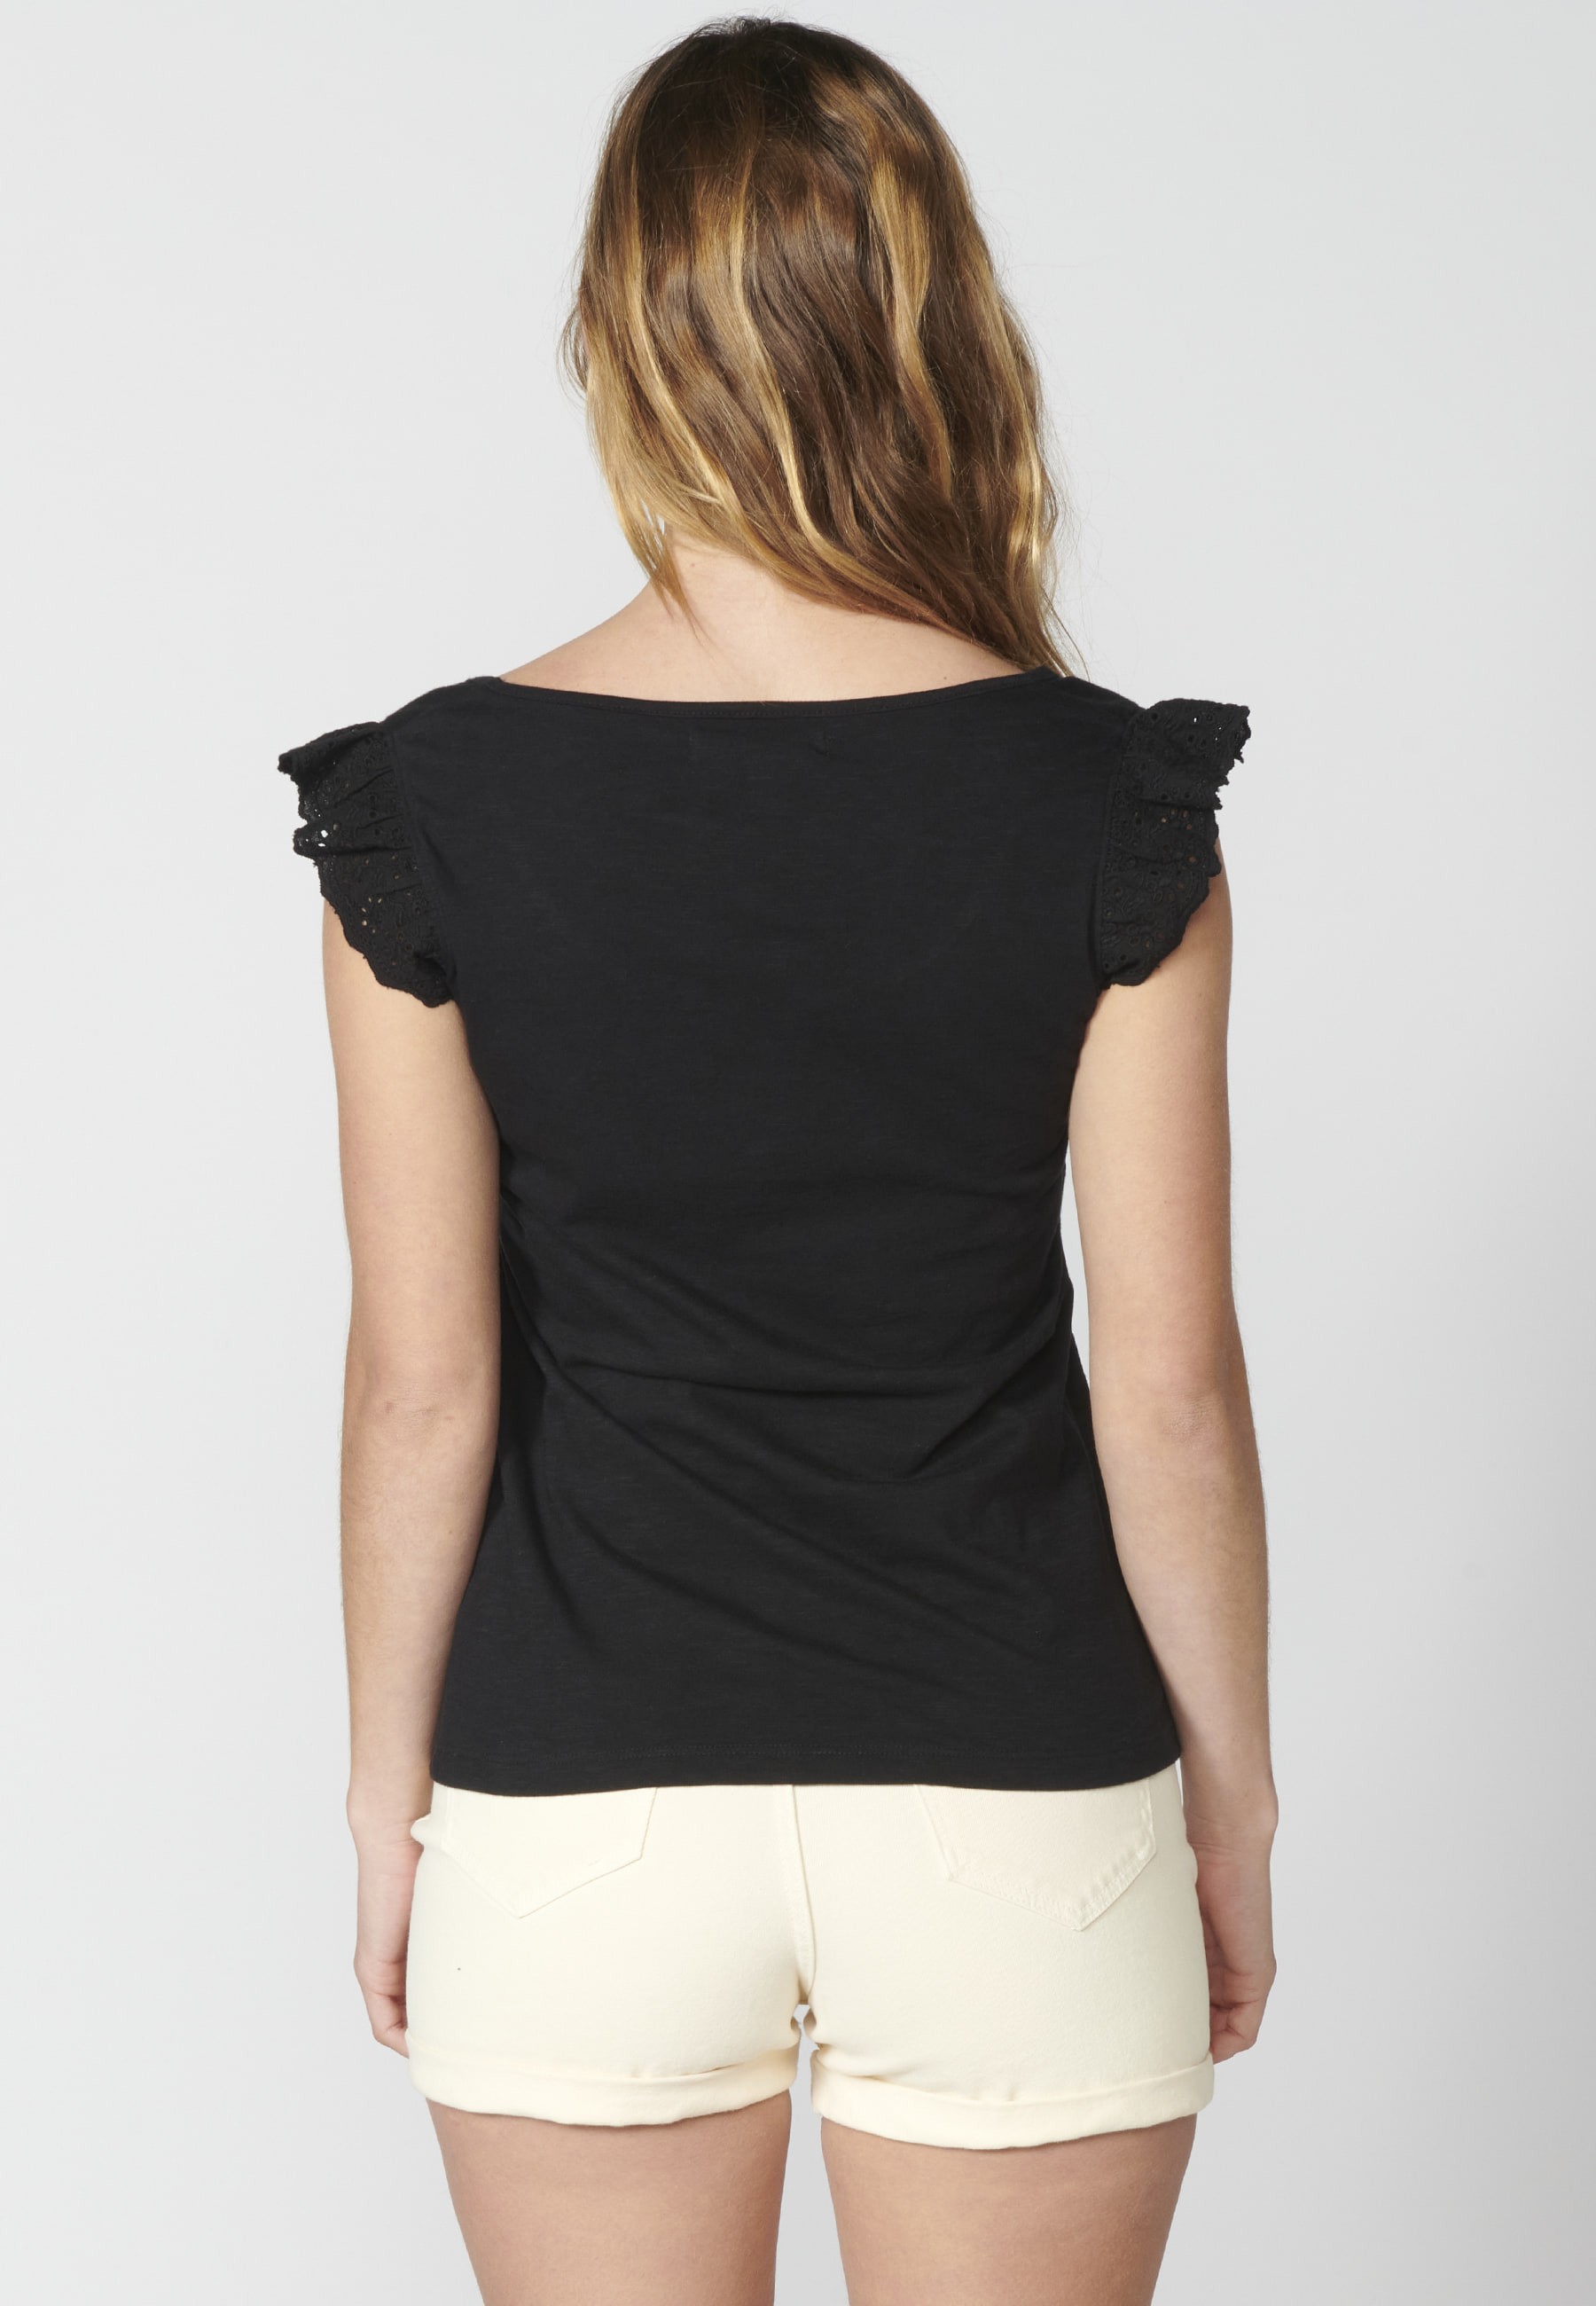 Short-sleeved T-shirt with floral embroidery in Black color for Women 7